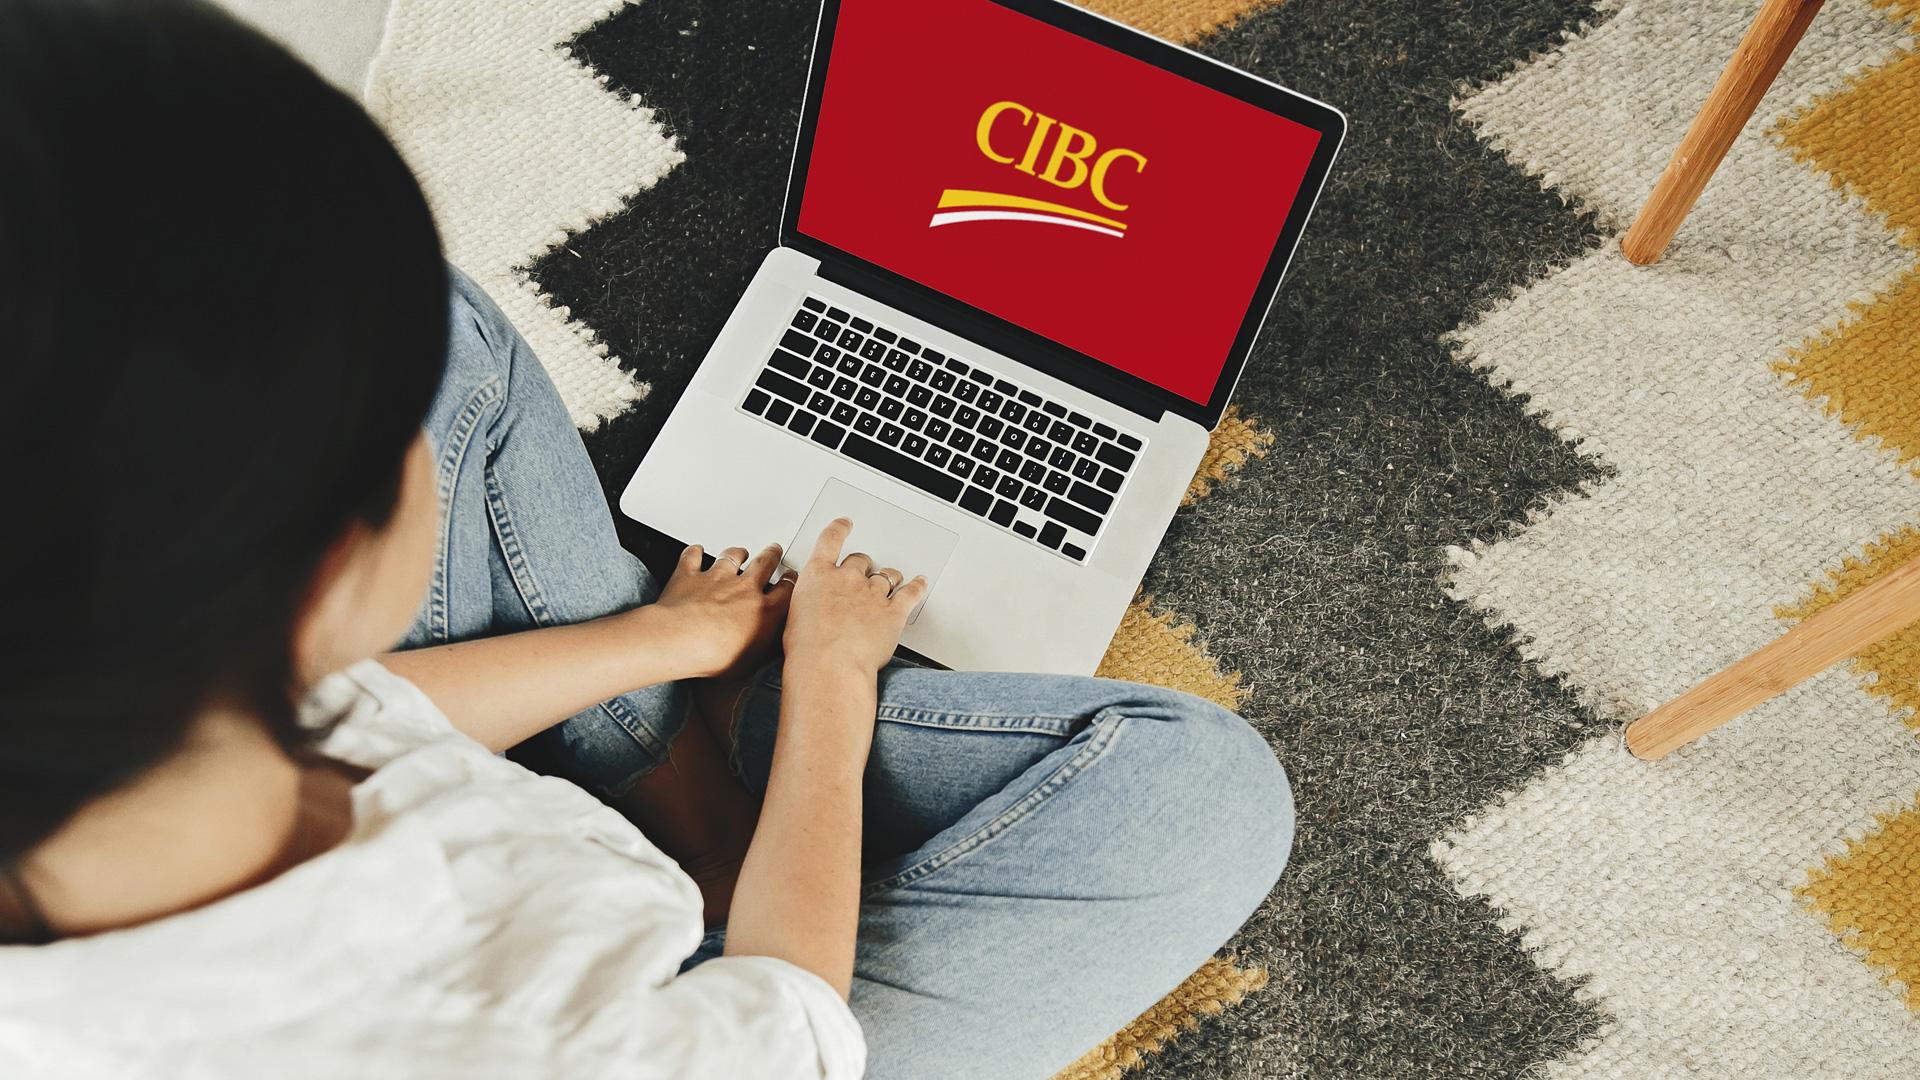 Canadian Imperial Bank of Commerce CIBC